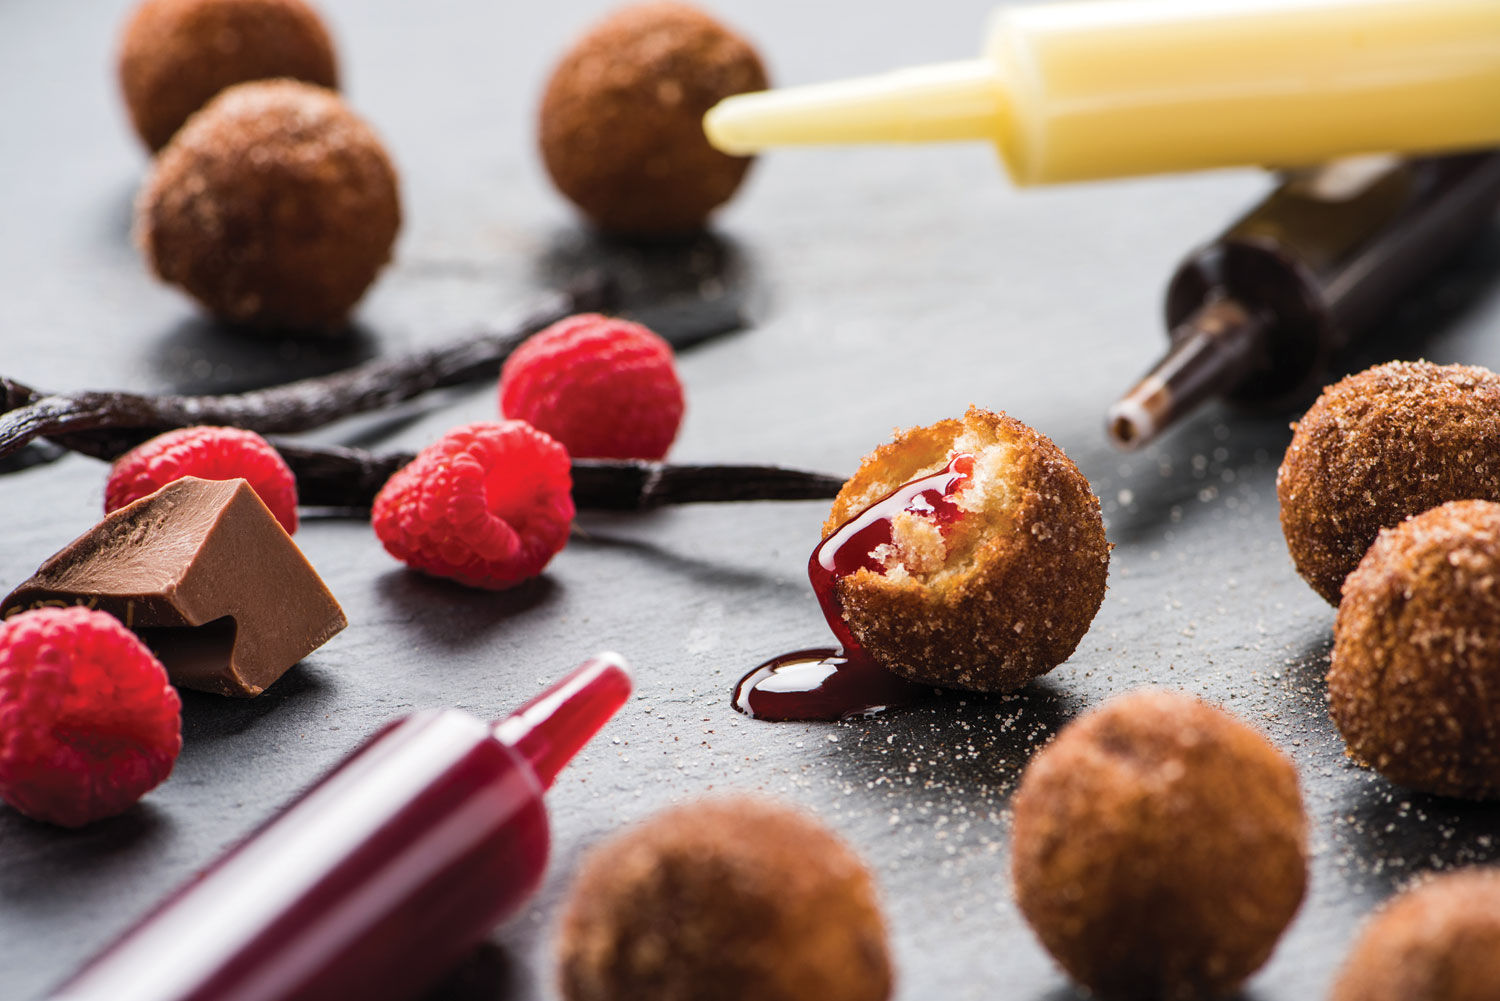 The Injectable Donut Holes include chocolate, raspberry and Bavarian cream fillings. (Courtesy: Topgolf)